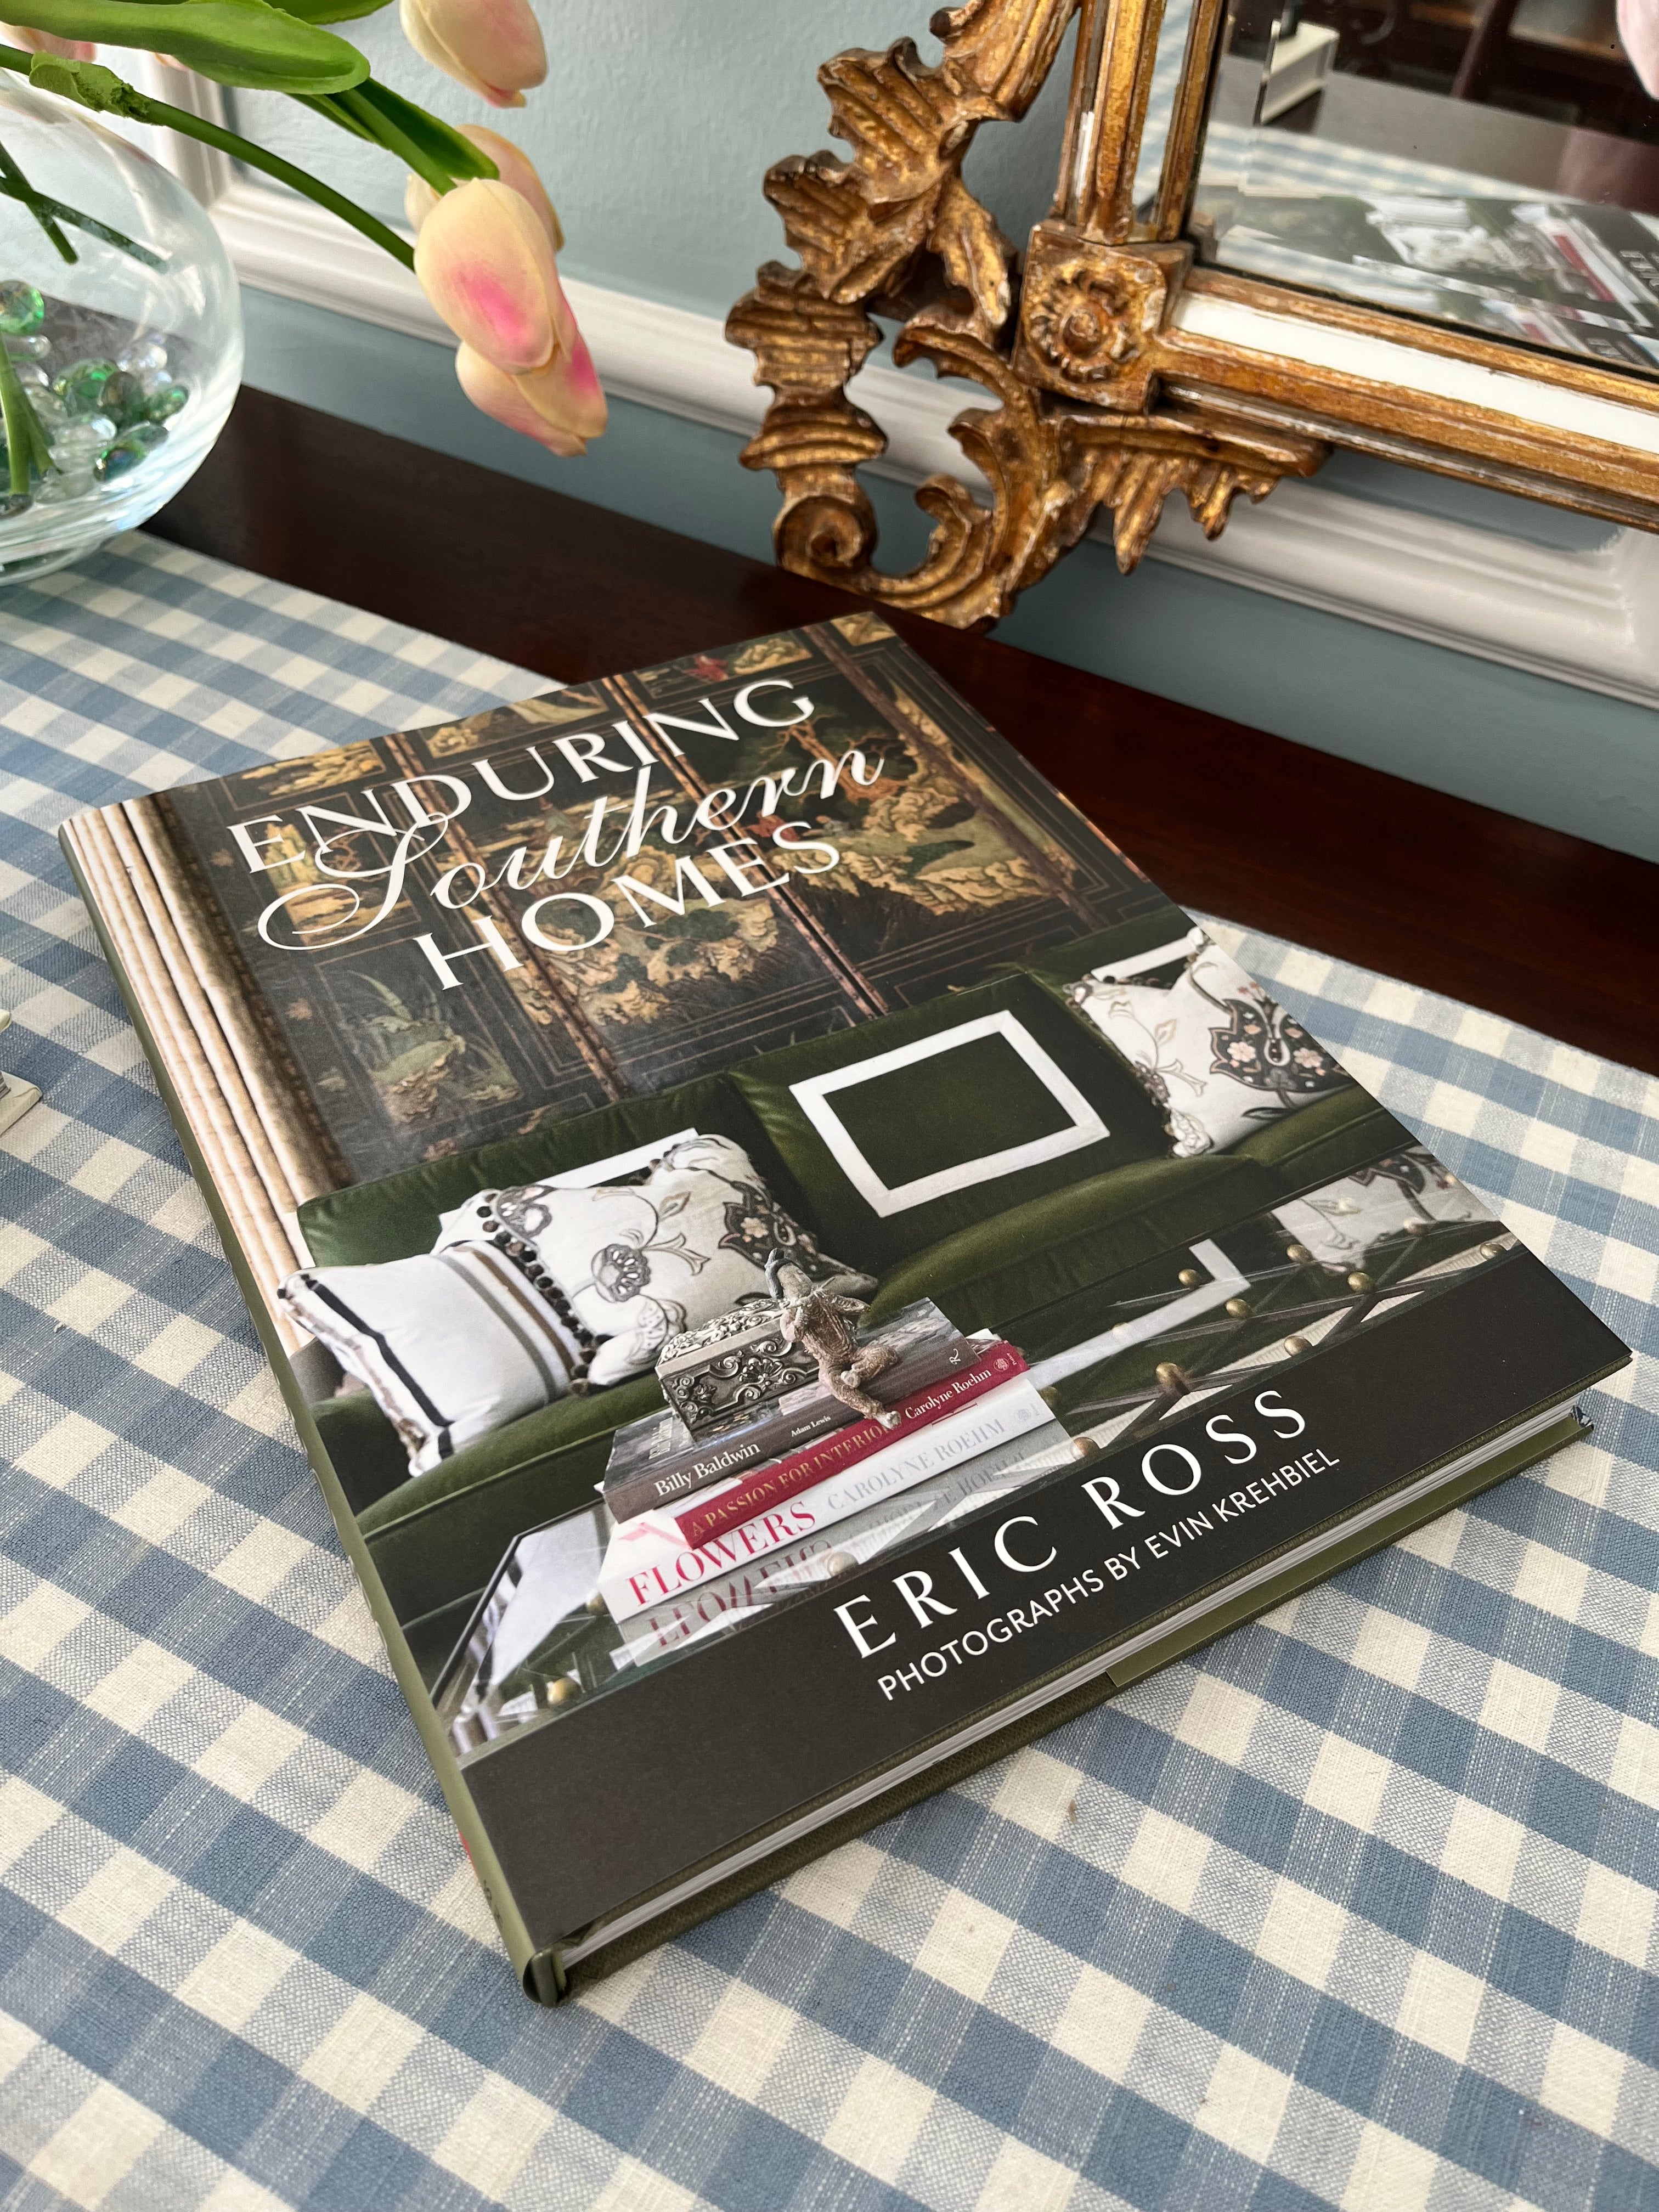 "Enduring Southern Homes" by Eric Ross